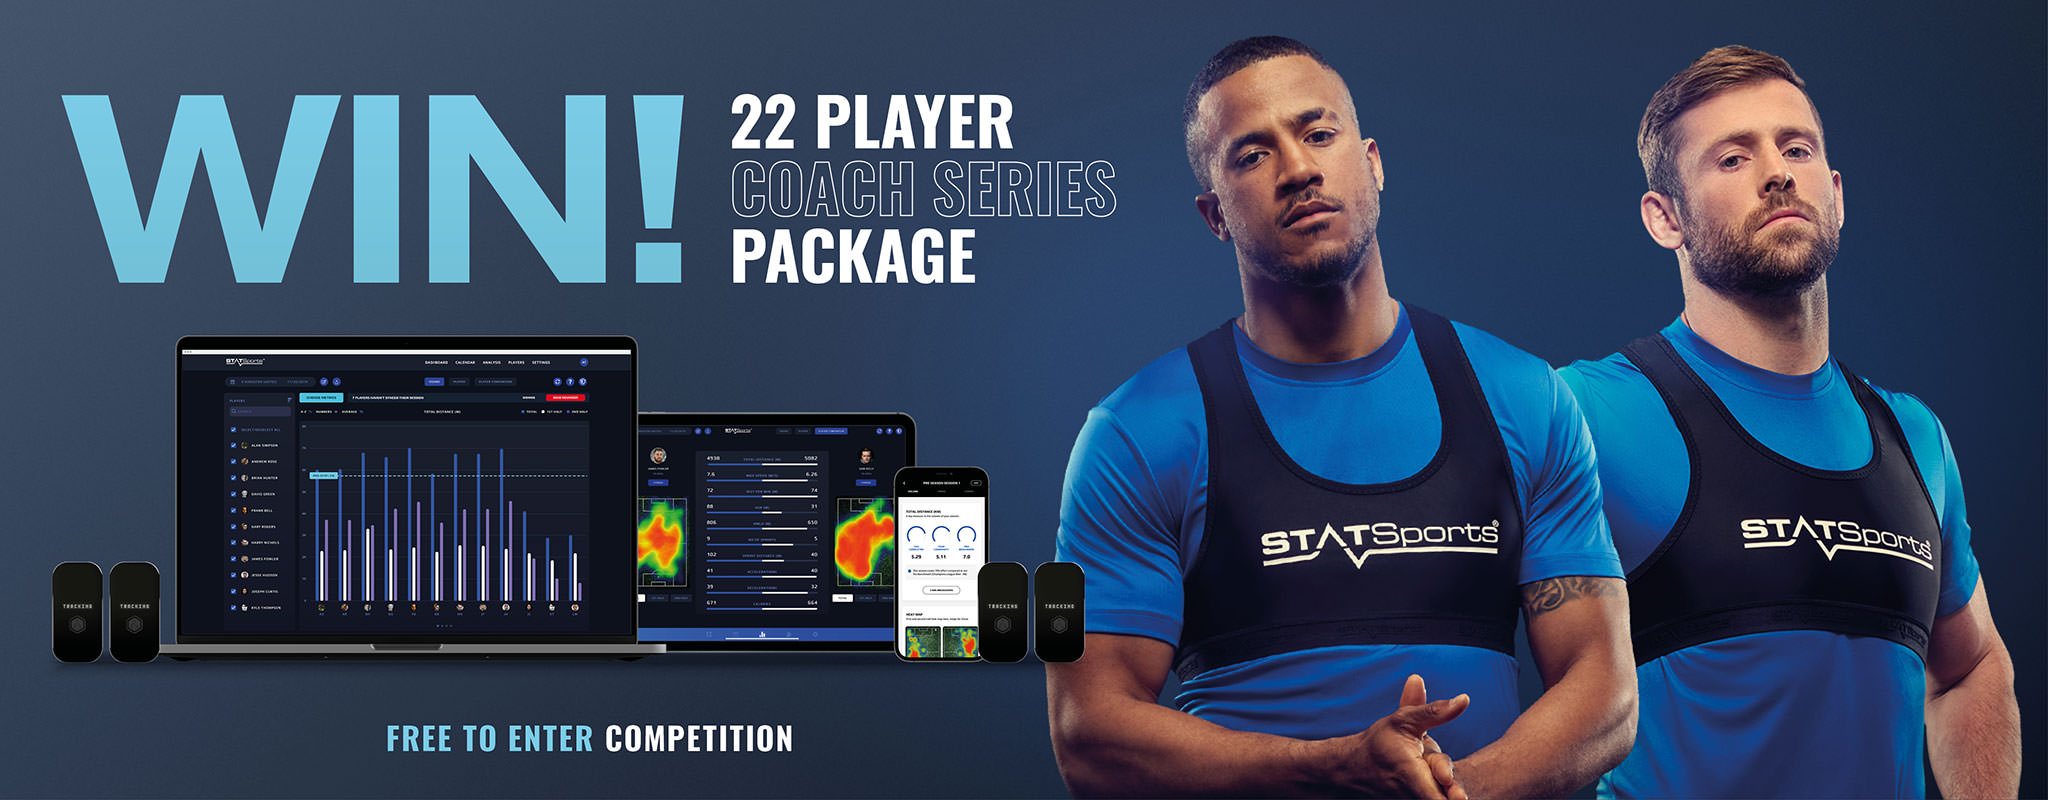 Win a 22 player Coach Series package